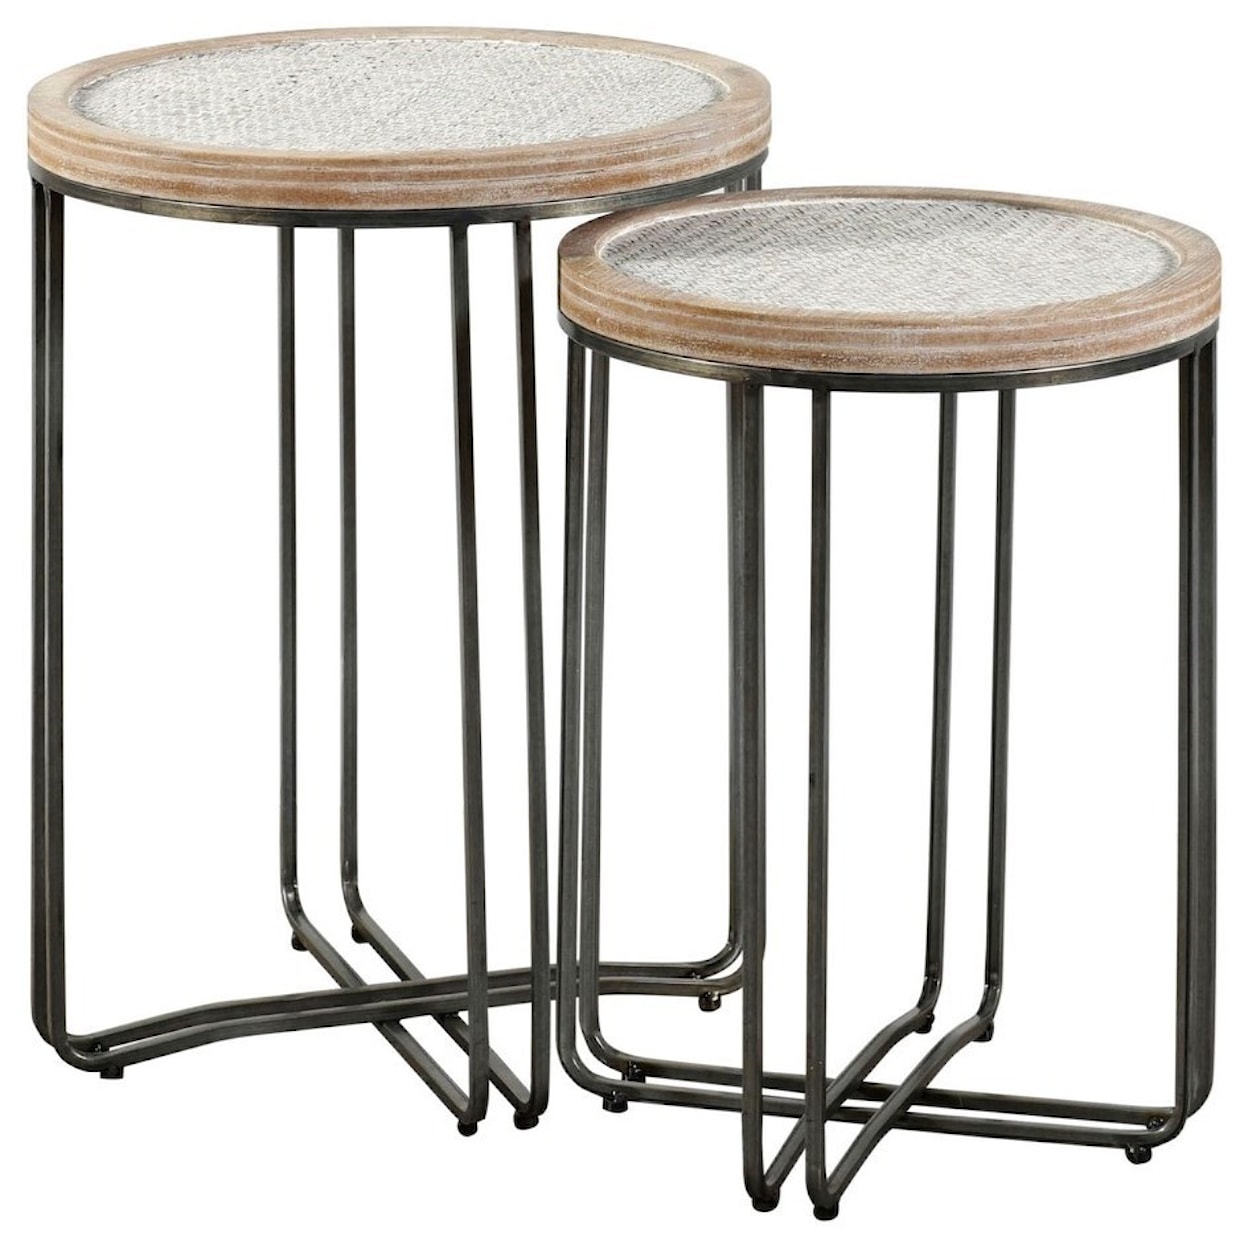 StyleCraft Occasional Tables Ryder Wood & Rattan Nesting Tables